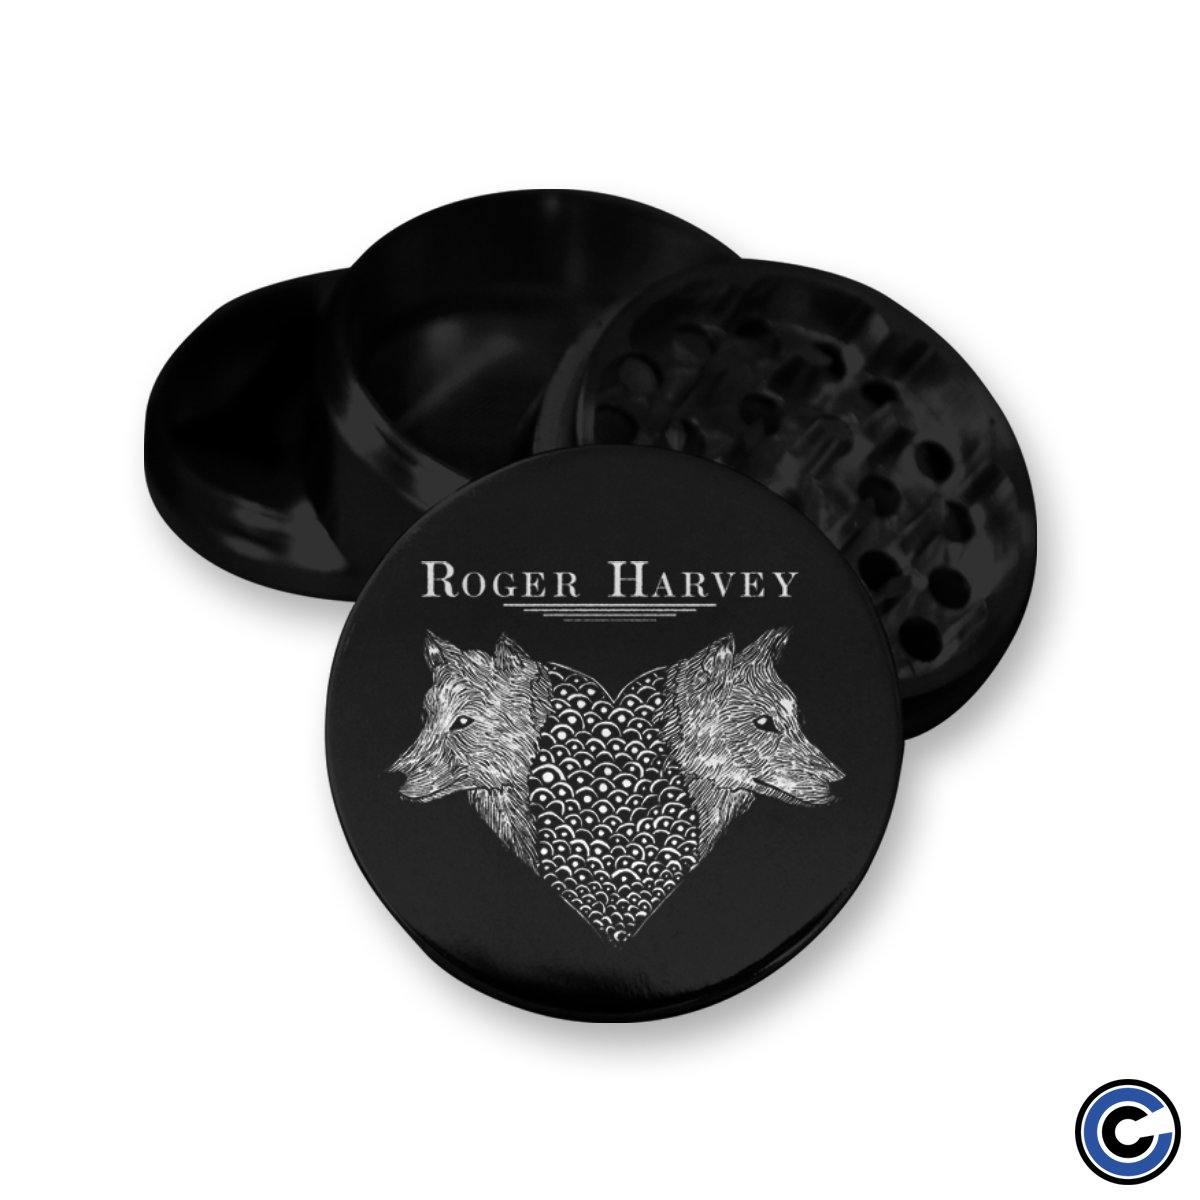 Buy – Roger Harvey "Two Coyotes" Stoner CD Bundle – Band & Music Merch – Cold Cuts Merch